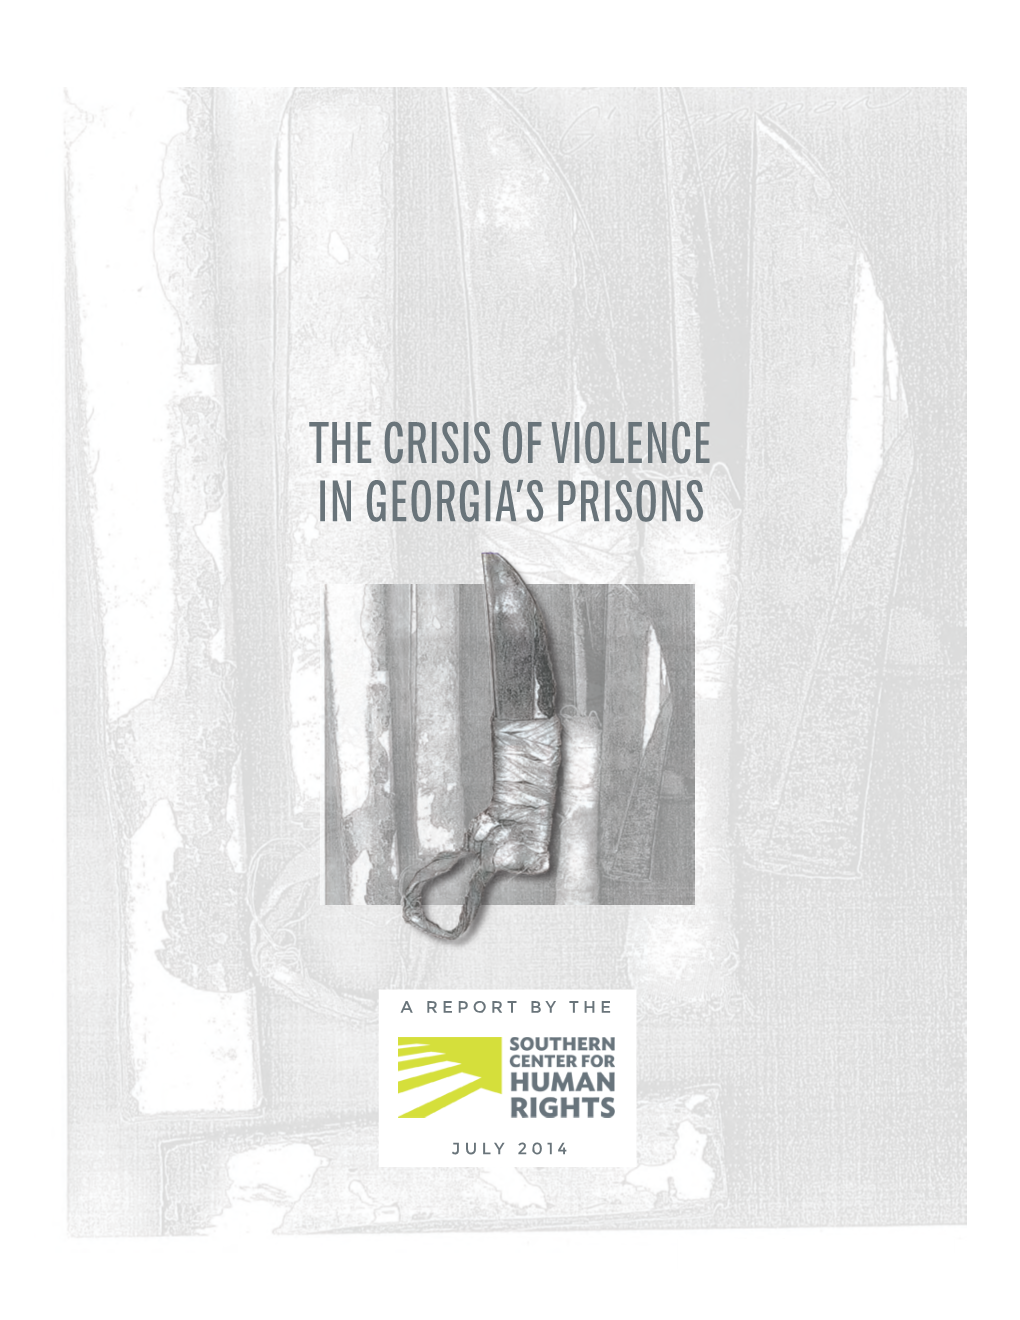 The Crisis of Violence in Georgia's Prisons